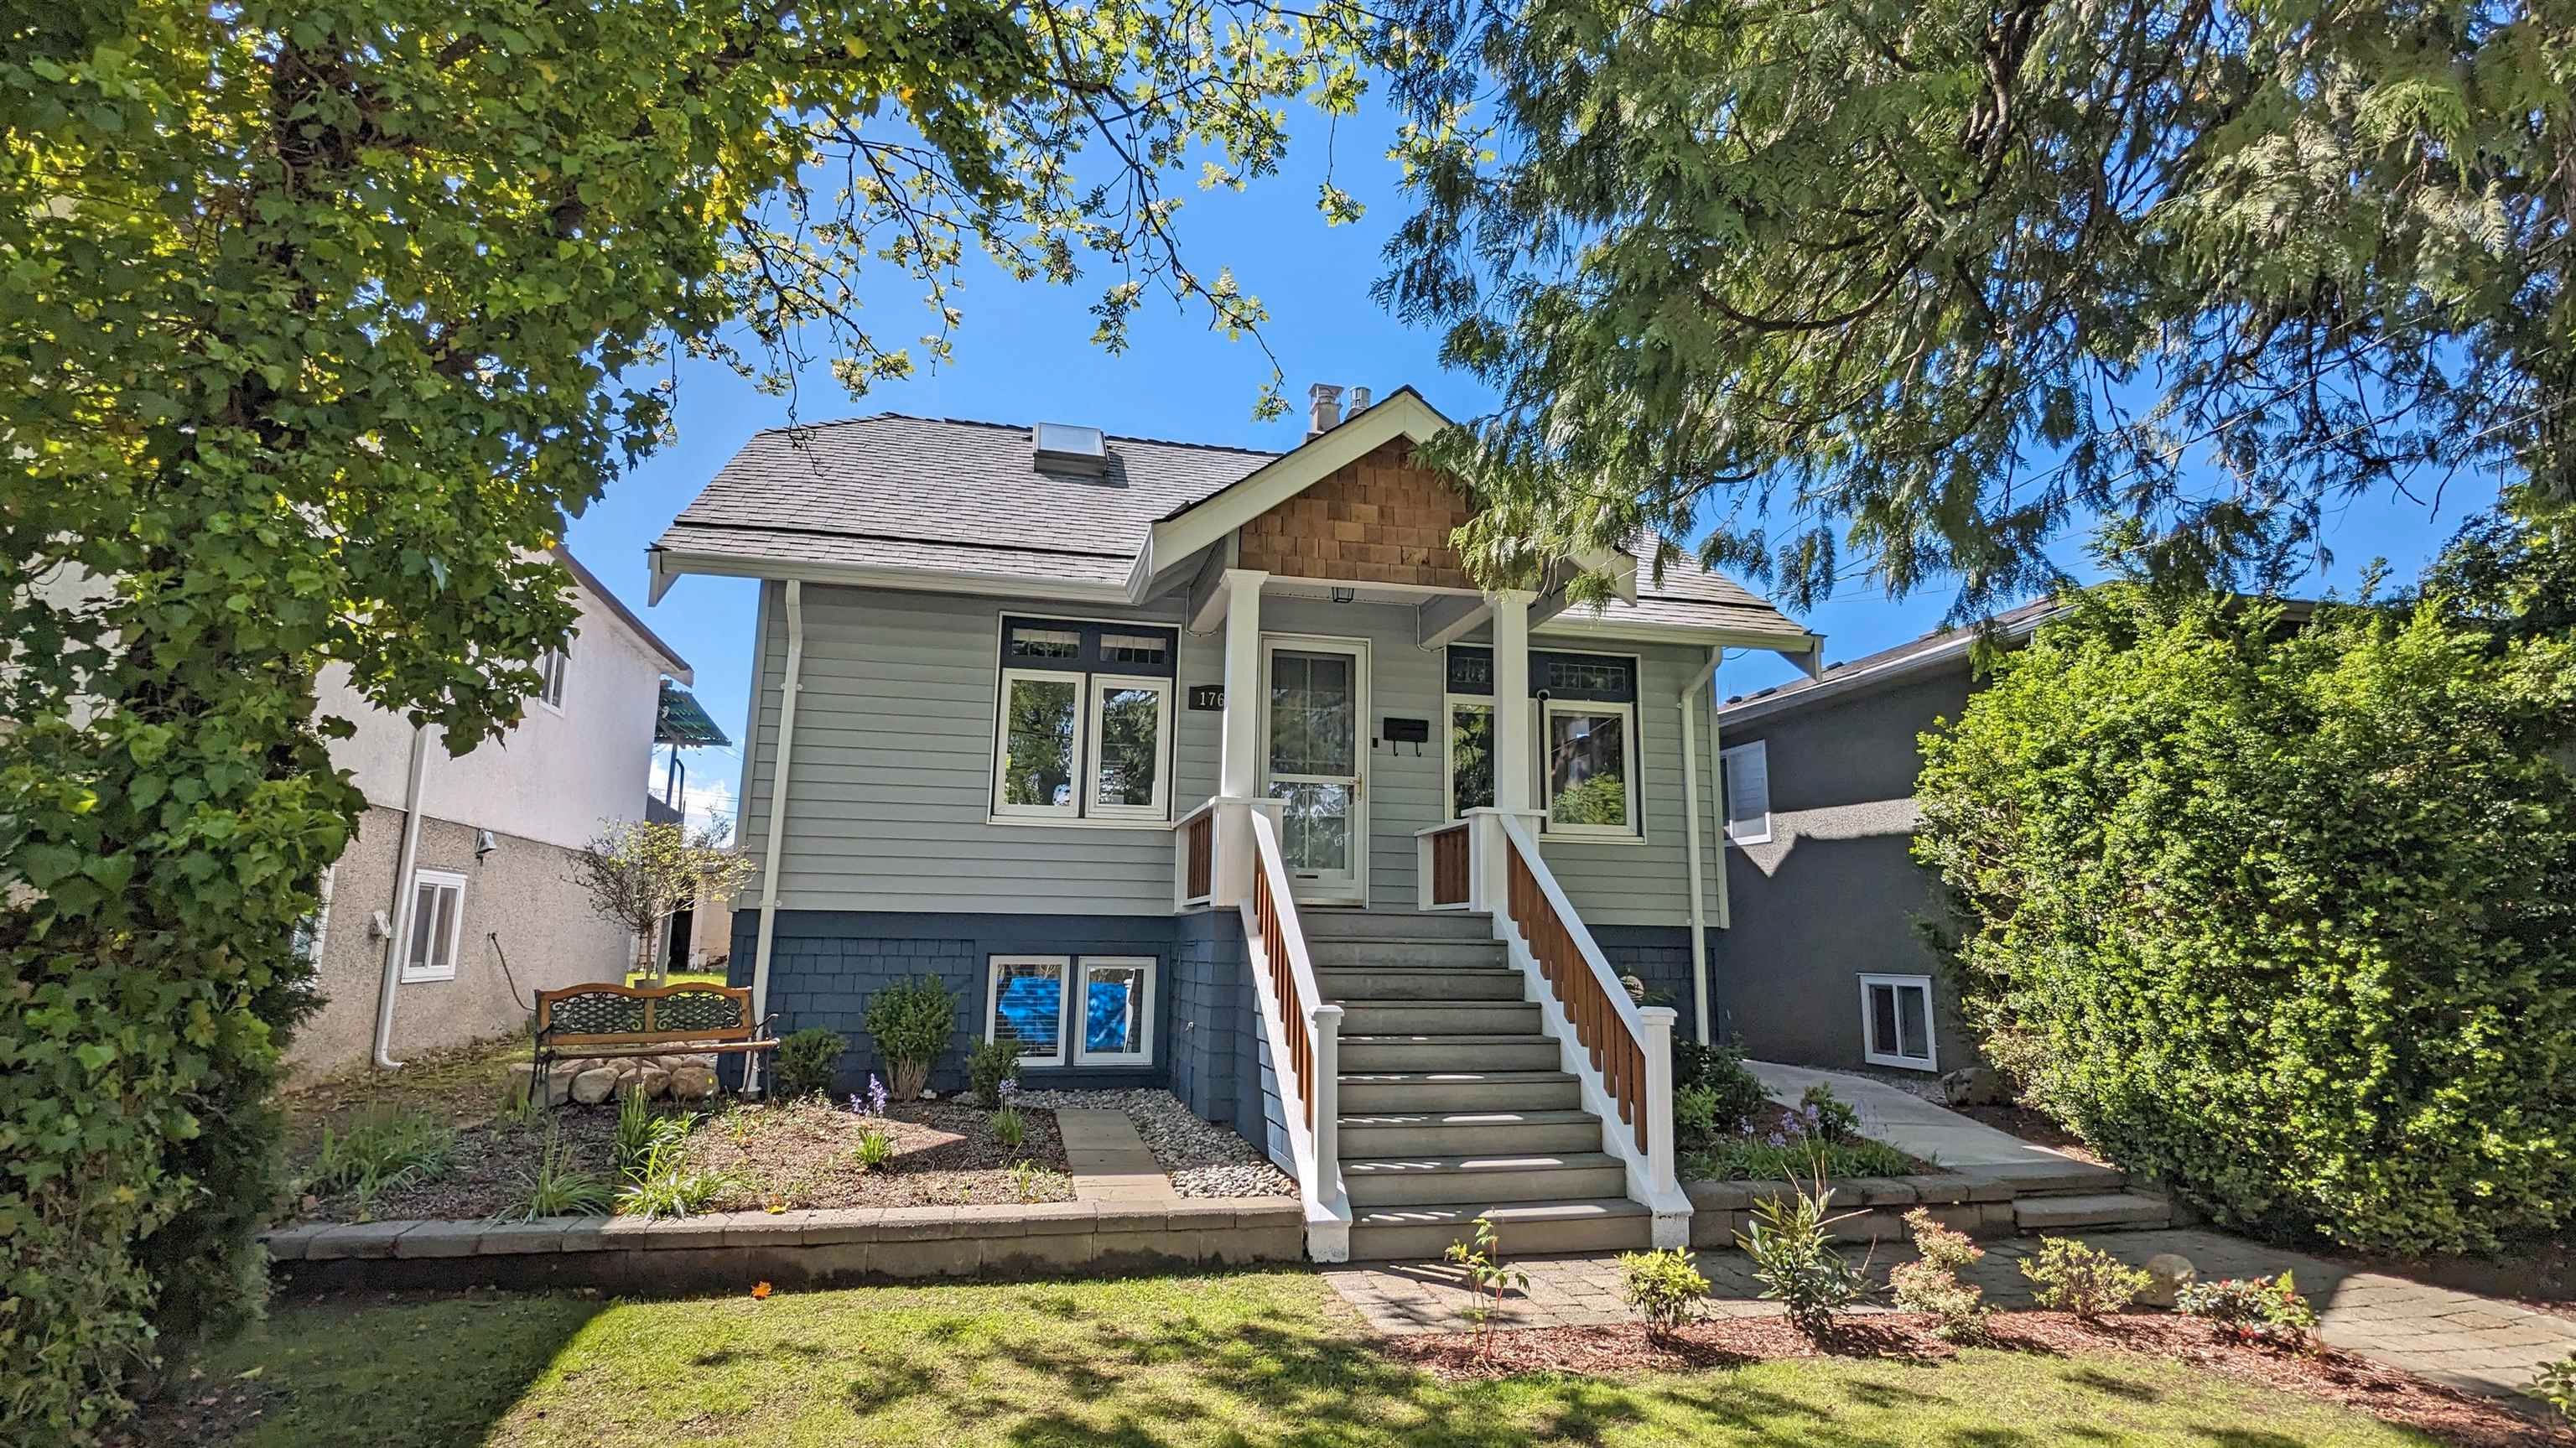 FEATURED LISTING: 1760 37TH Avenue East Vancouver